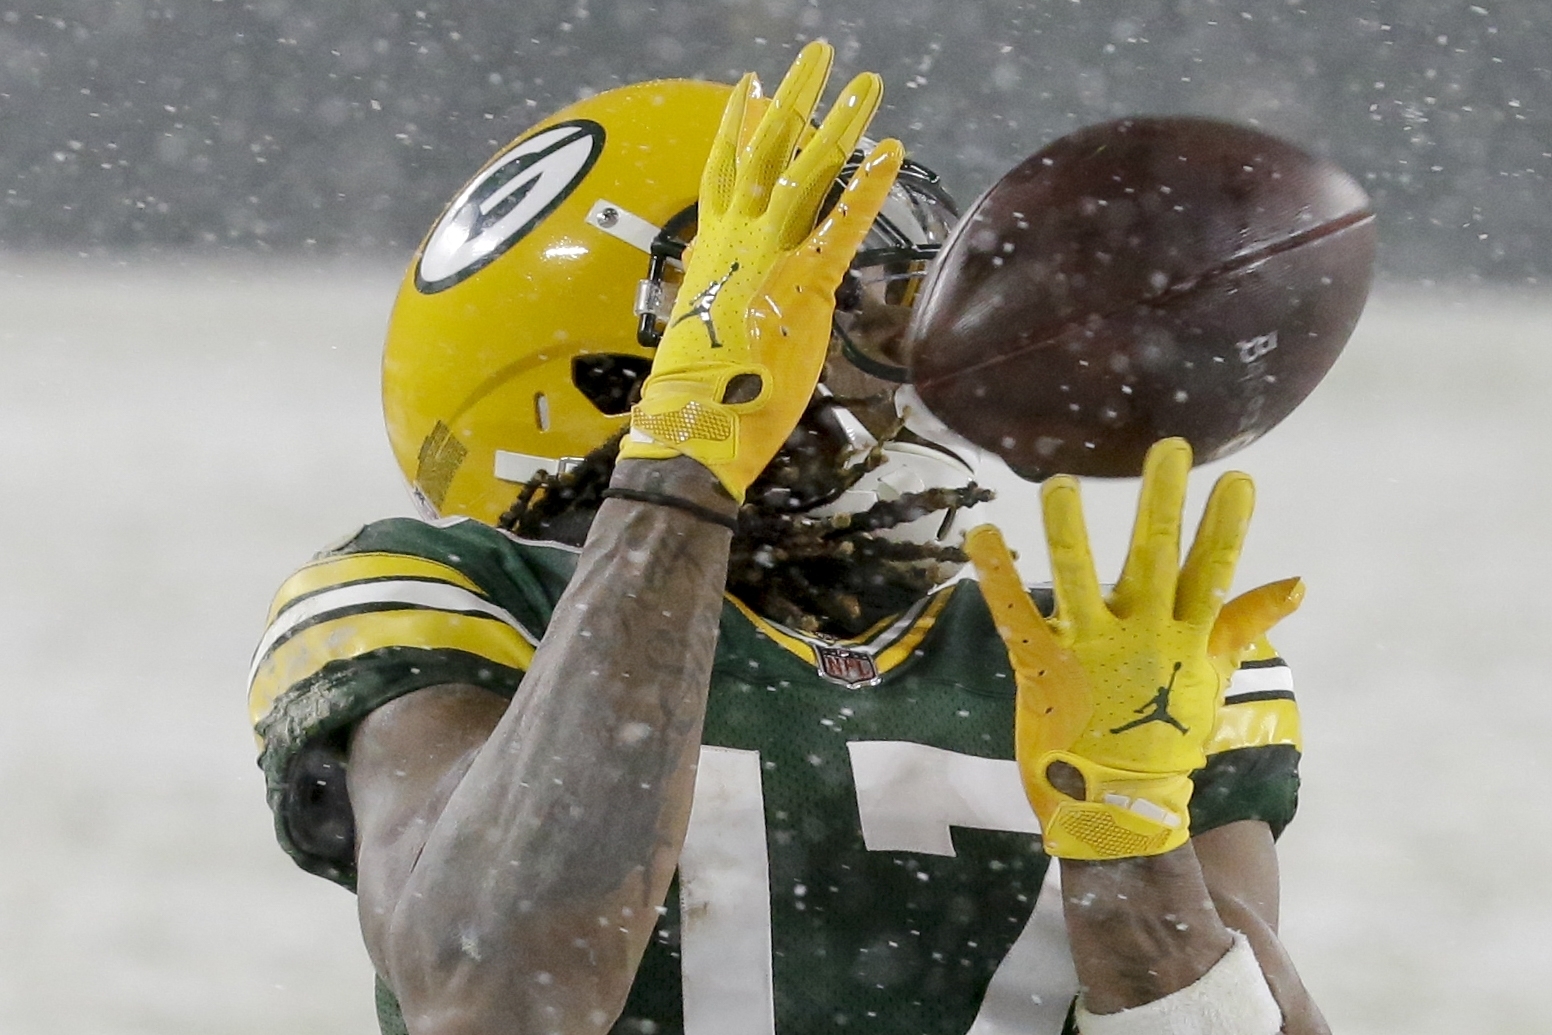 Adams shines in snow as Packers trounce Titans 40-14